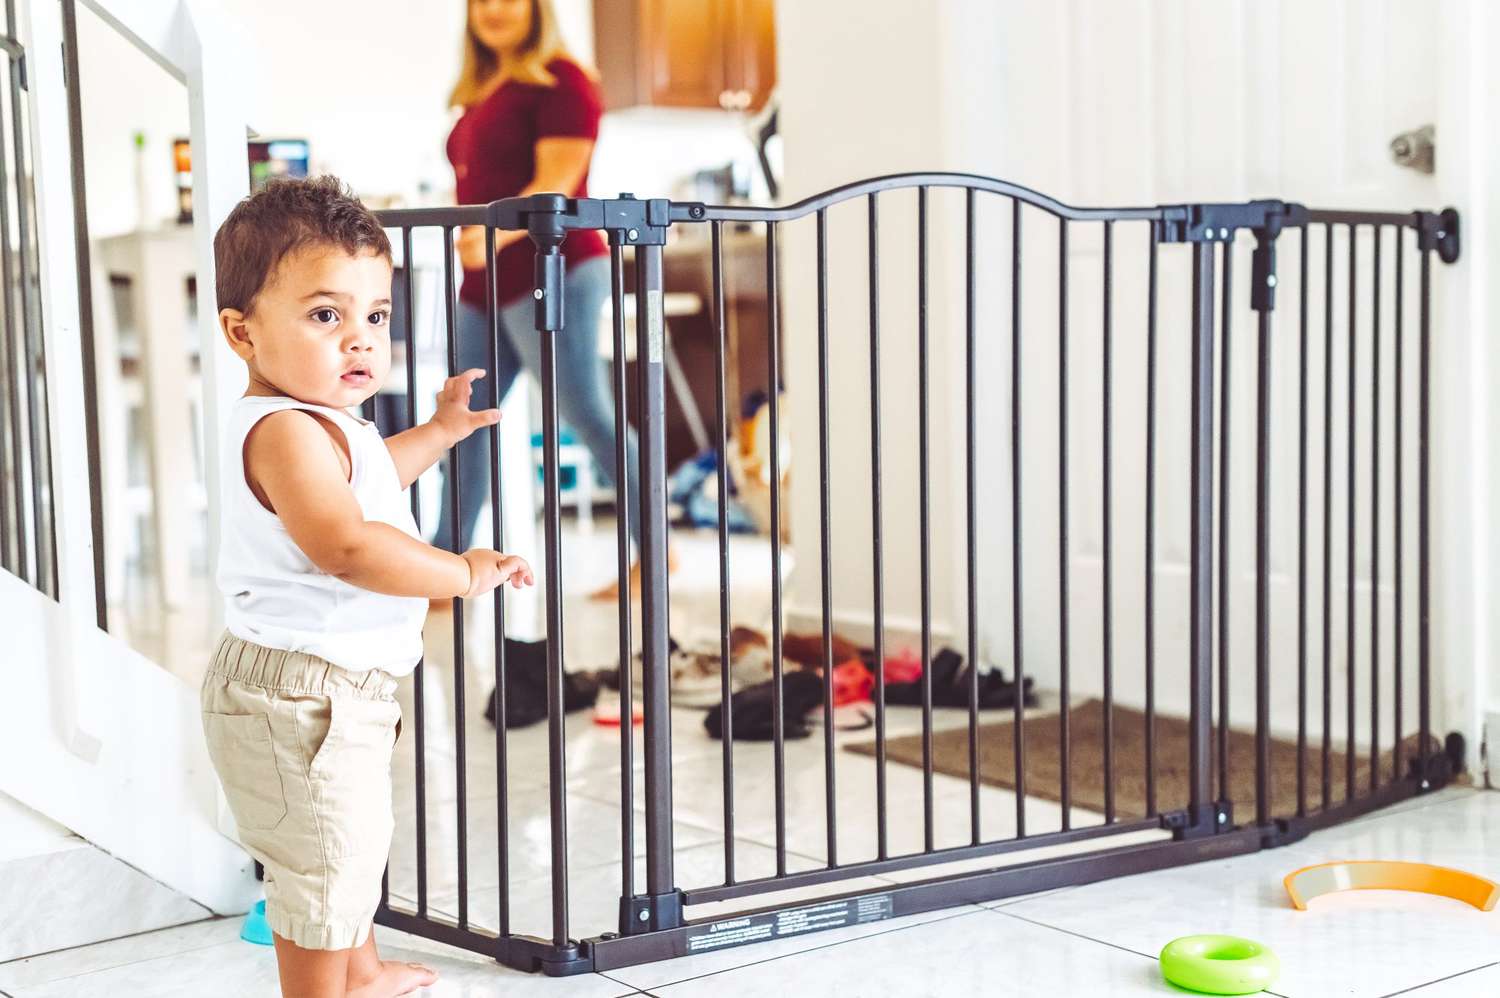 baby standing next to baby gate